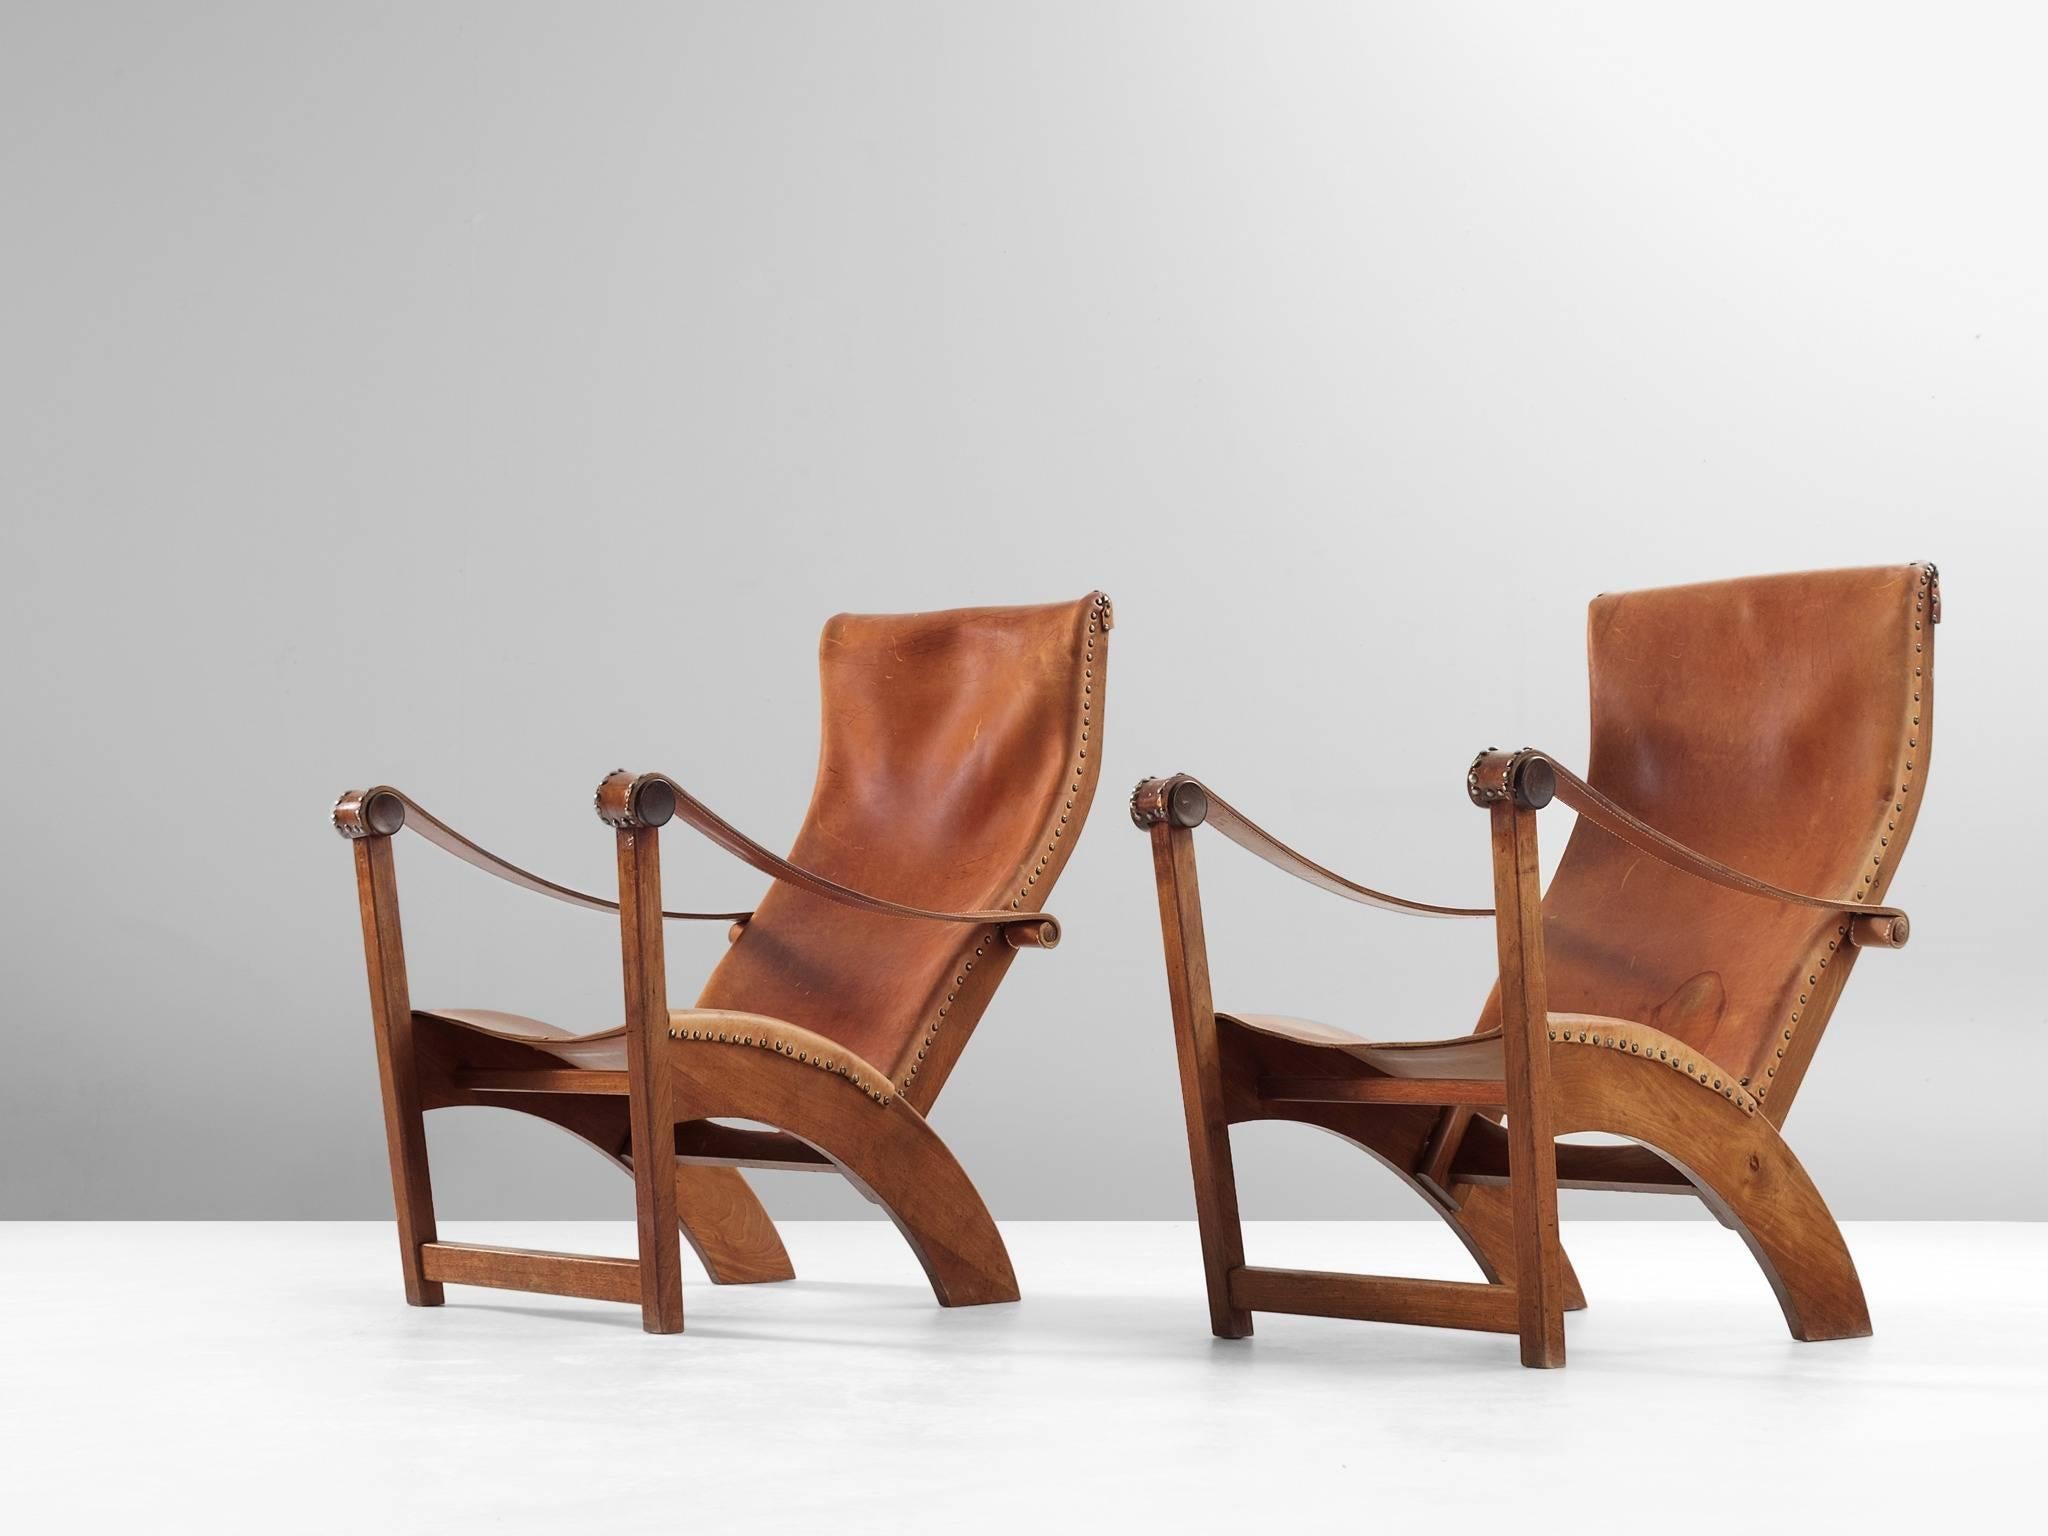 Lounge chairs model 'Københavnerstolen', in mahogany and leather, by Mogens Voltelen for Niels Vodder, Denmark 1936. 

Set of two stunning Copenhagen chairs by Mogens Voltelen. These chairs shows beautiful lines as seen on the arched legs on the